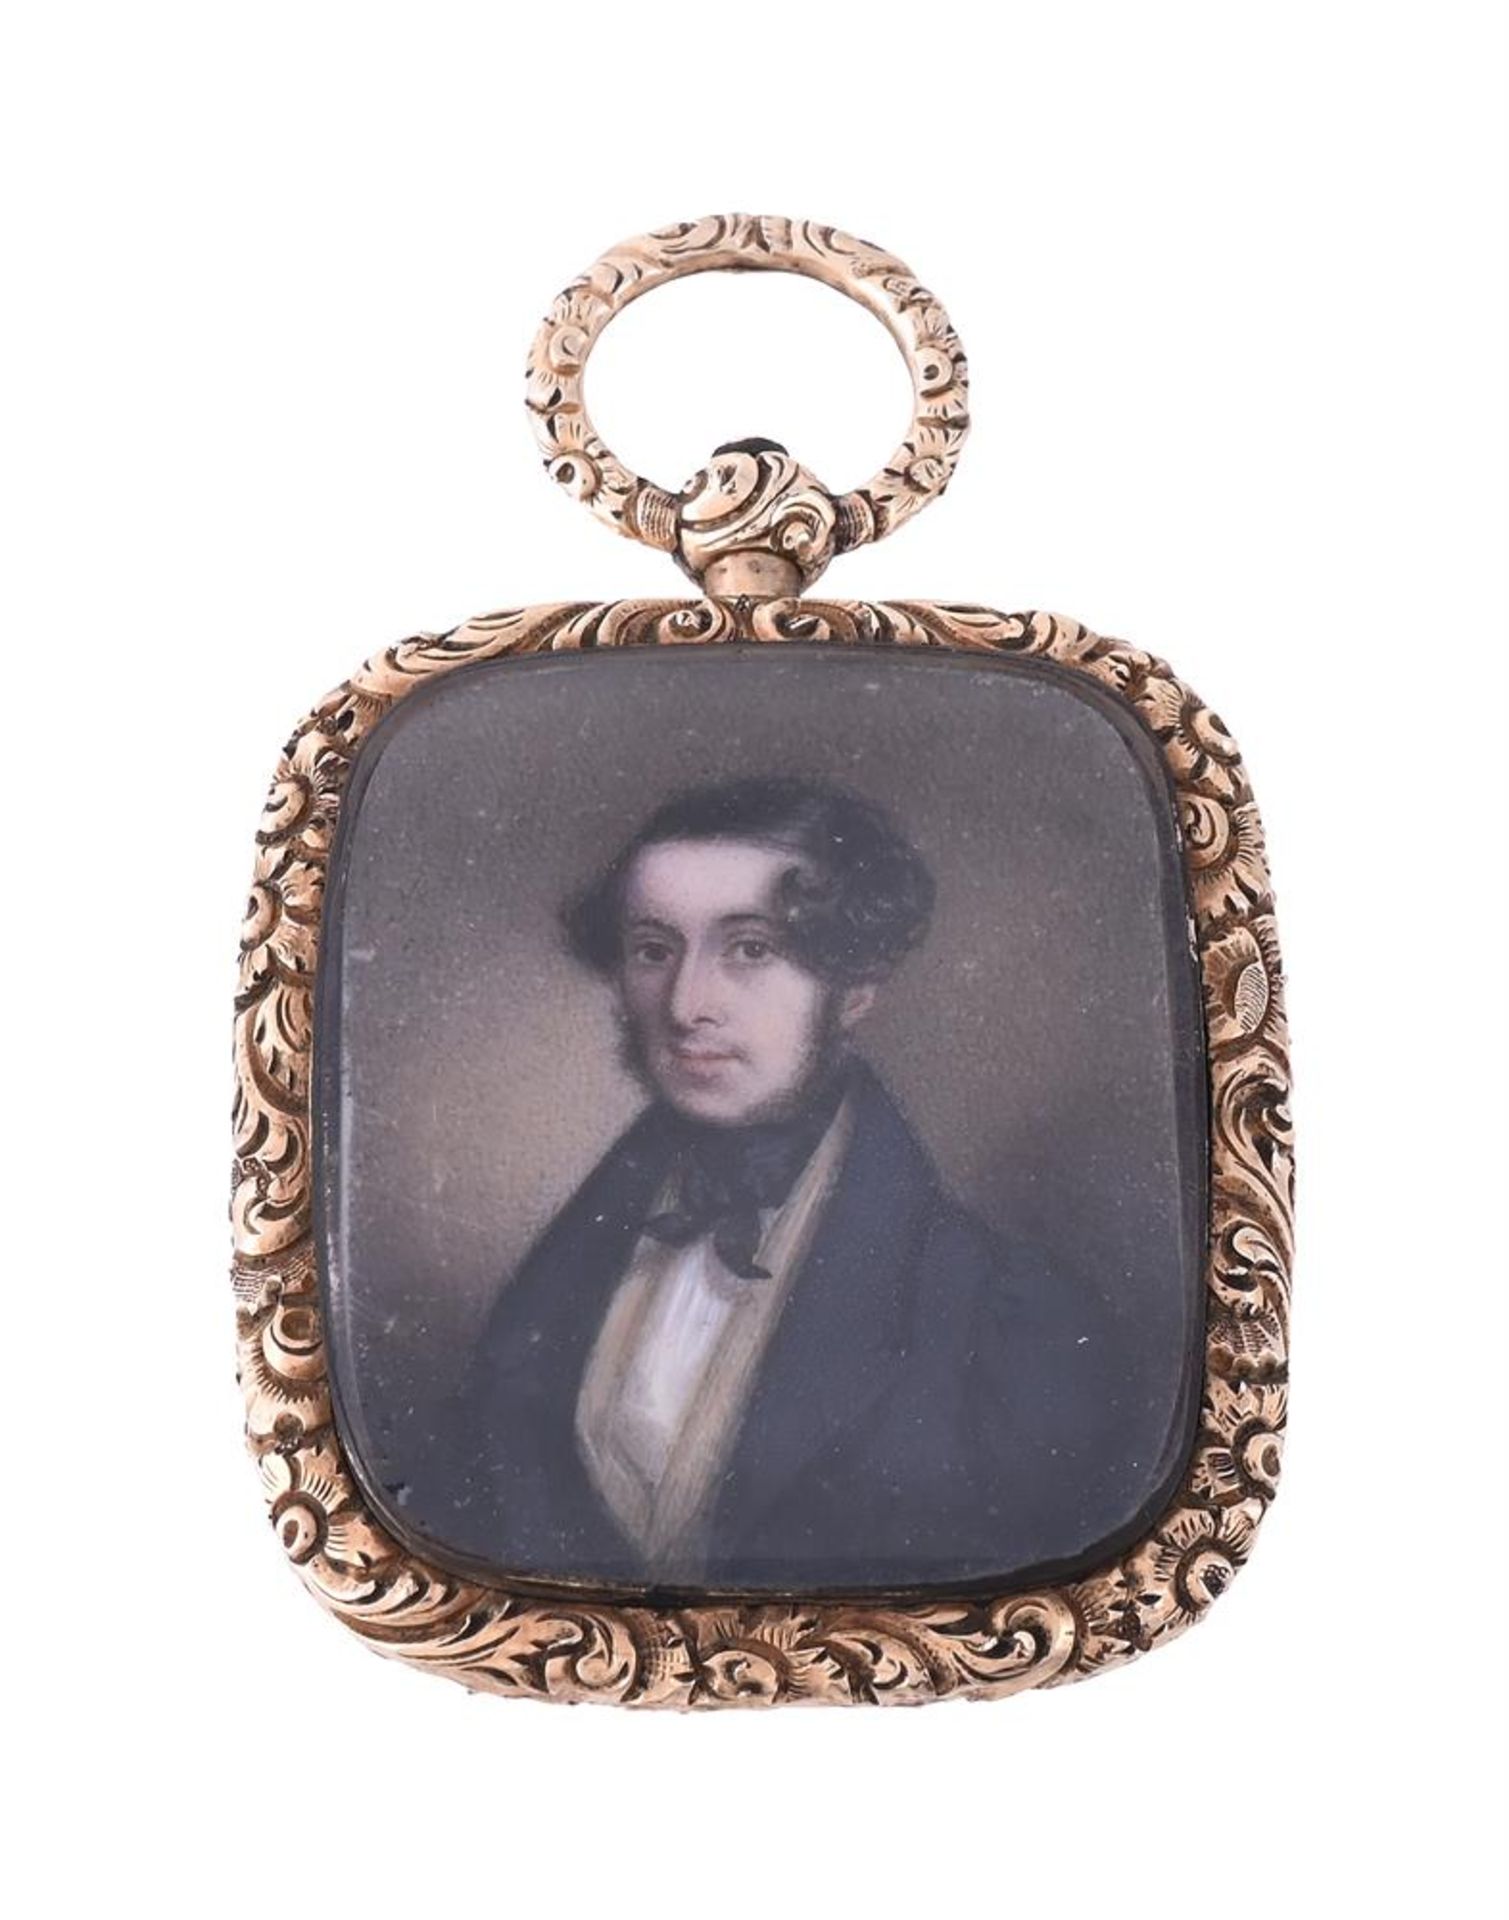 AN EARLY VICTORIAN DOUBLE SIDED GLAZED LOCKET, CIRCA 1840